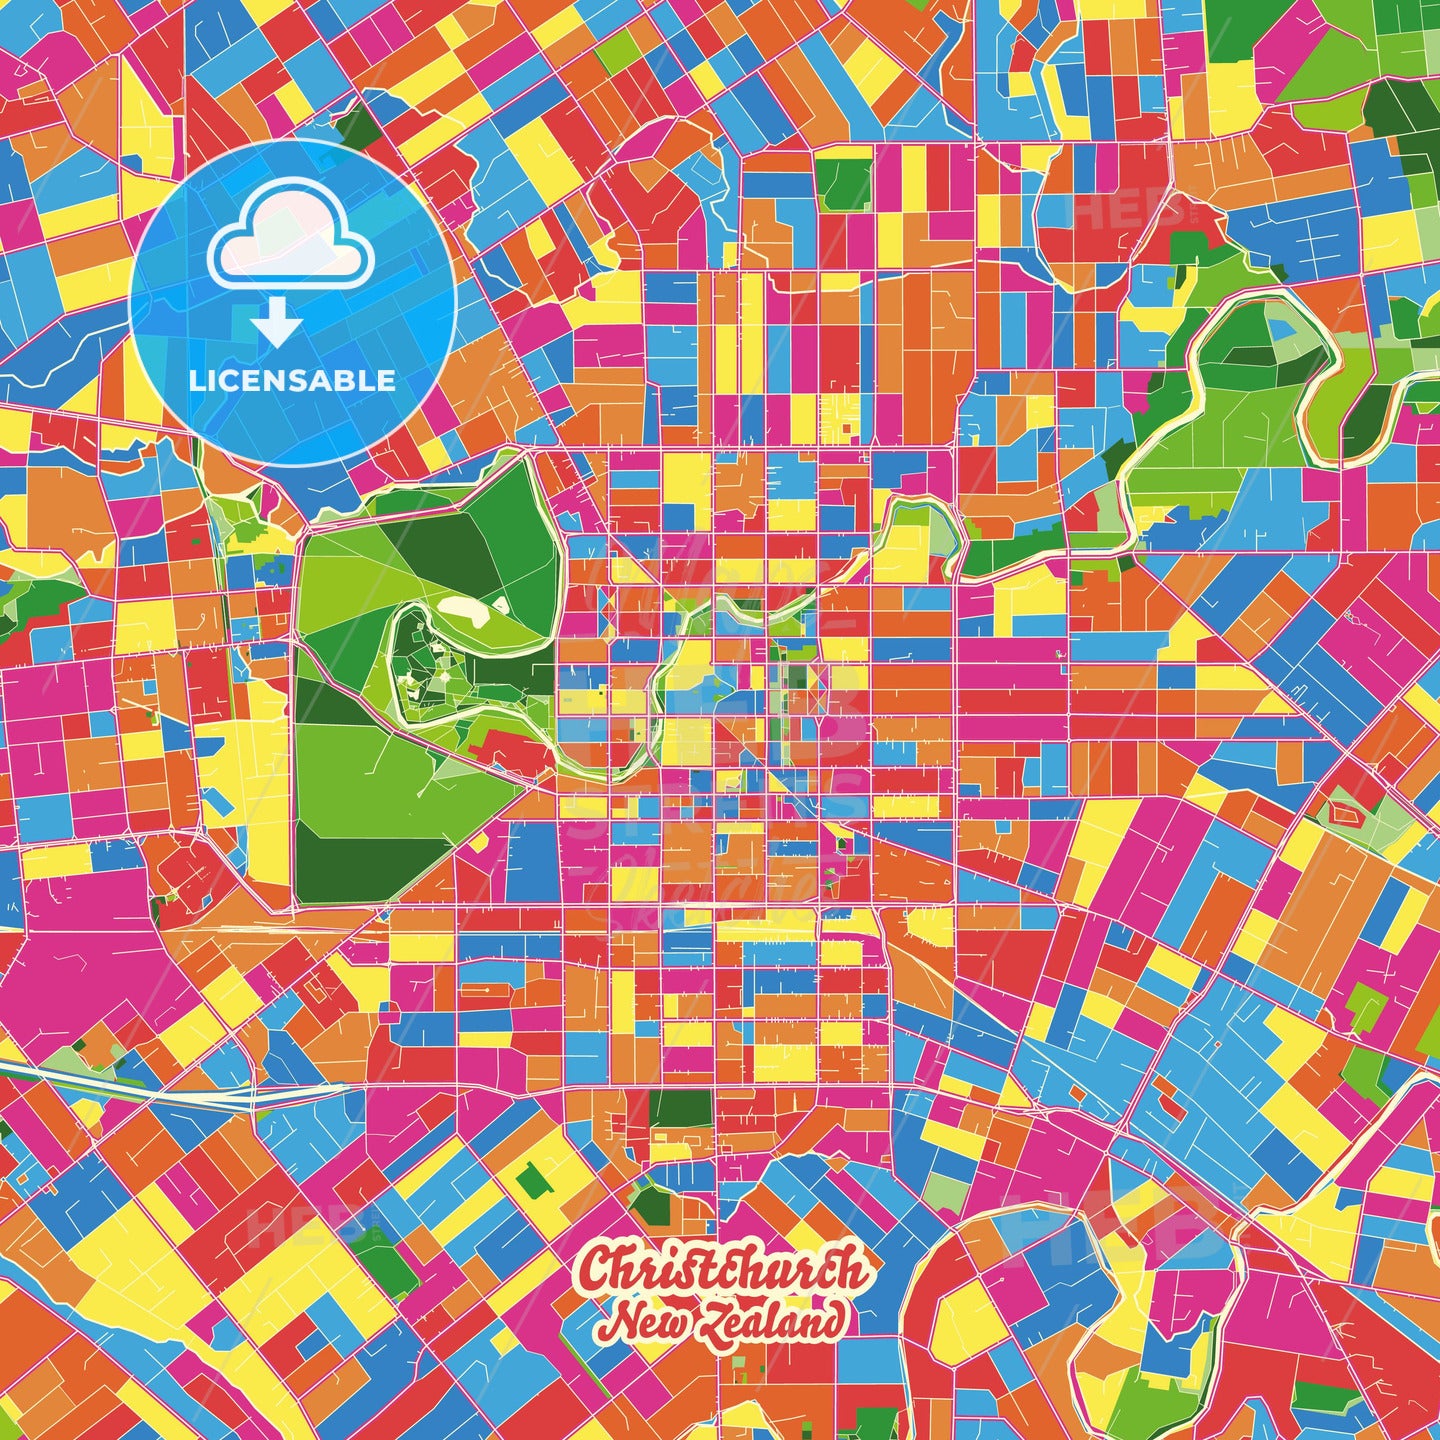 Christchurch, New Zealand Crazy Colorful Street Map Poster Template - HEBSTREITS Sketches